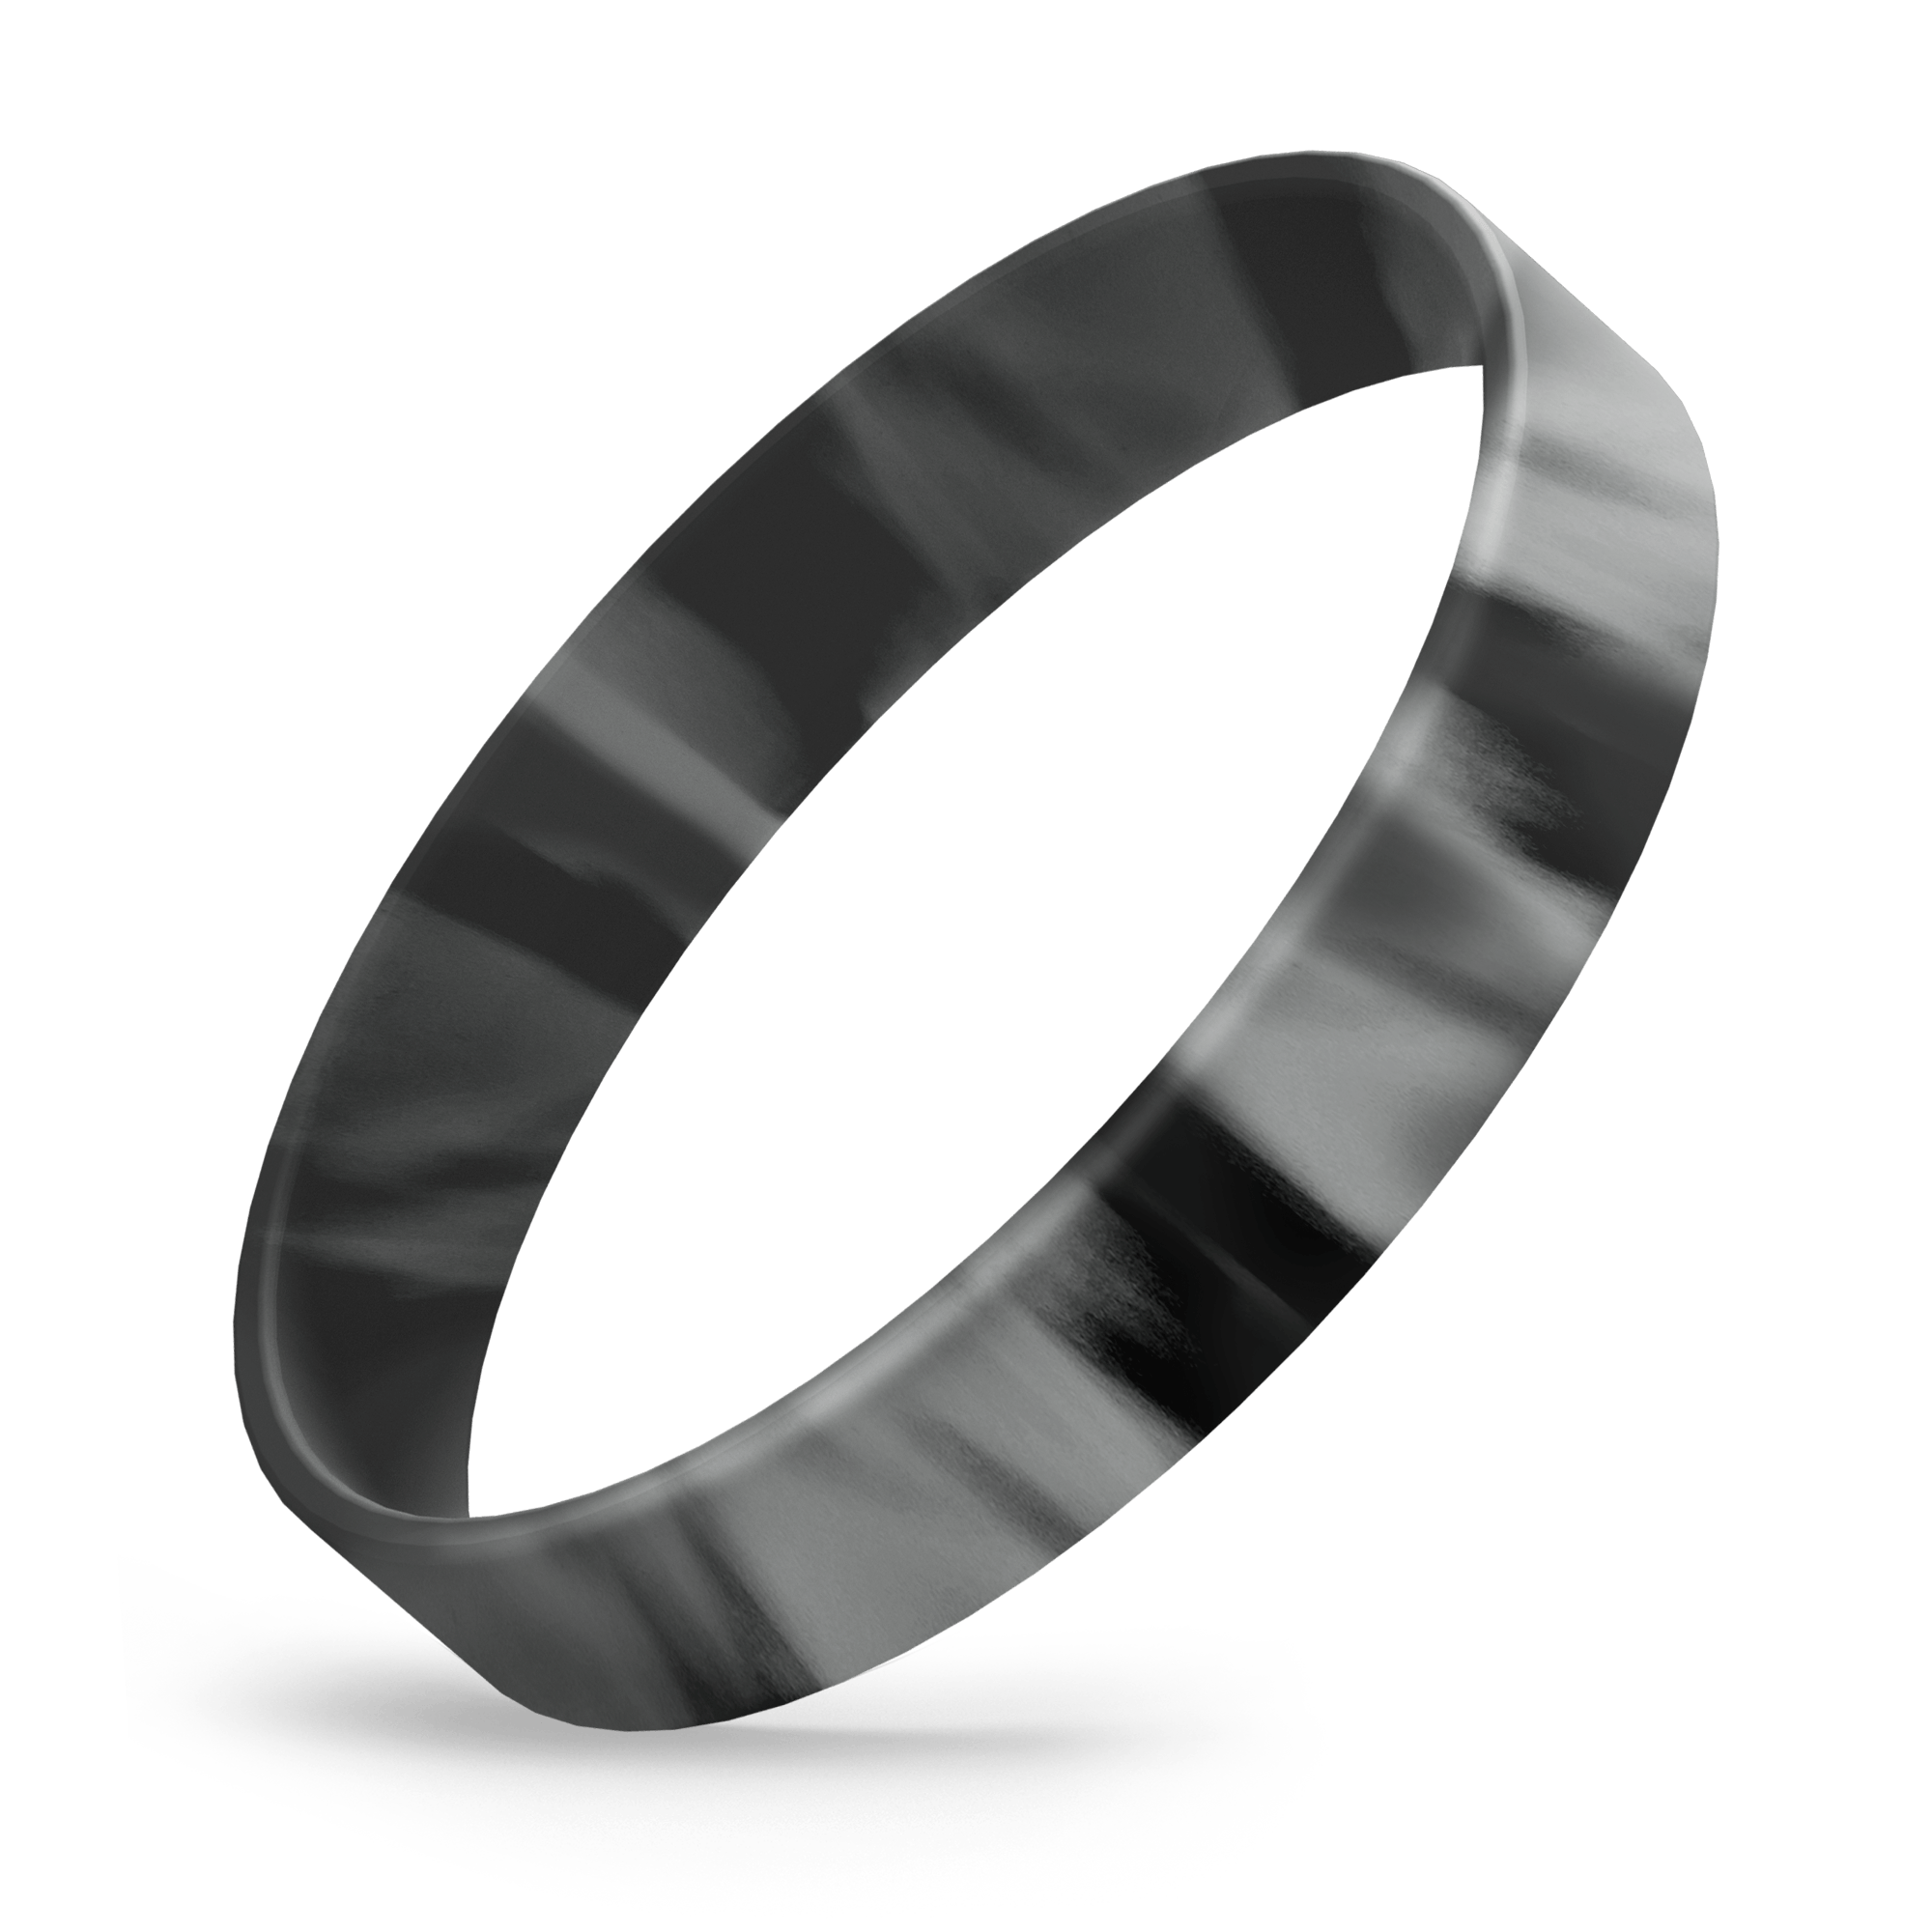 Custom Printed (Black / Grey Swirl) Silicone Wristbands - Rubber Bracelets by Wristband Resources